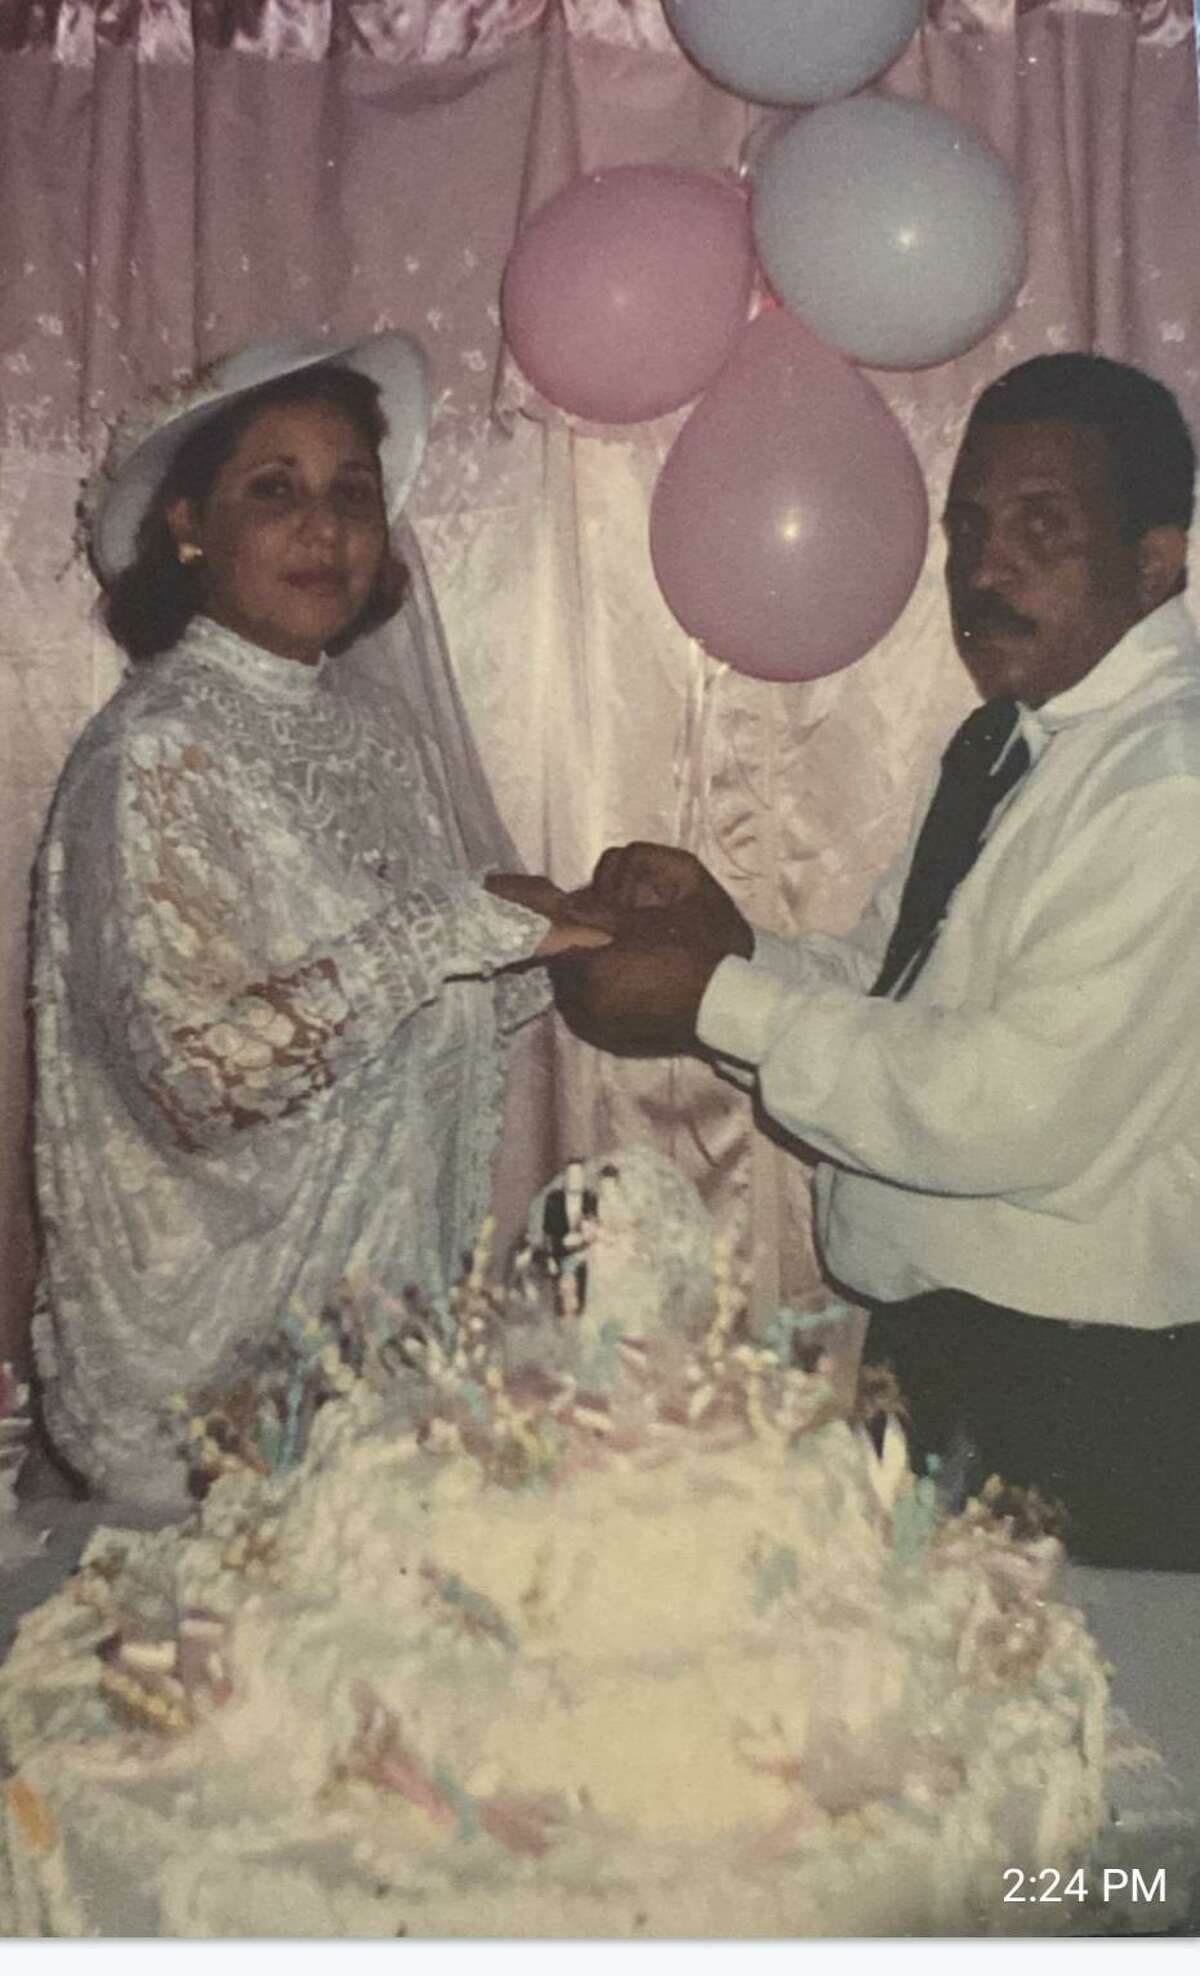 Vielka Jimenez de Reyes and her late husband, Roberto Reyes, on their wedding day in 1997 in the Dominican Republic.